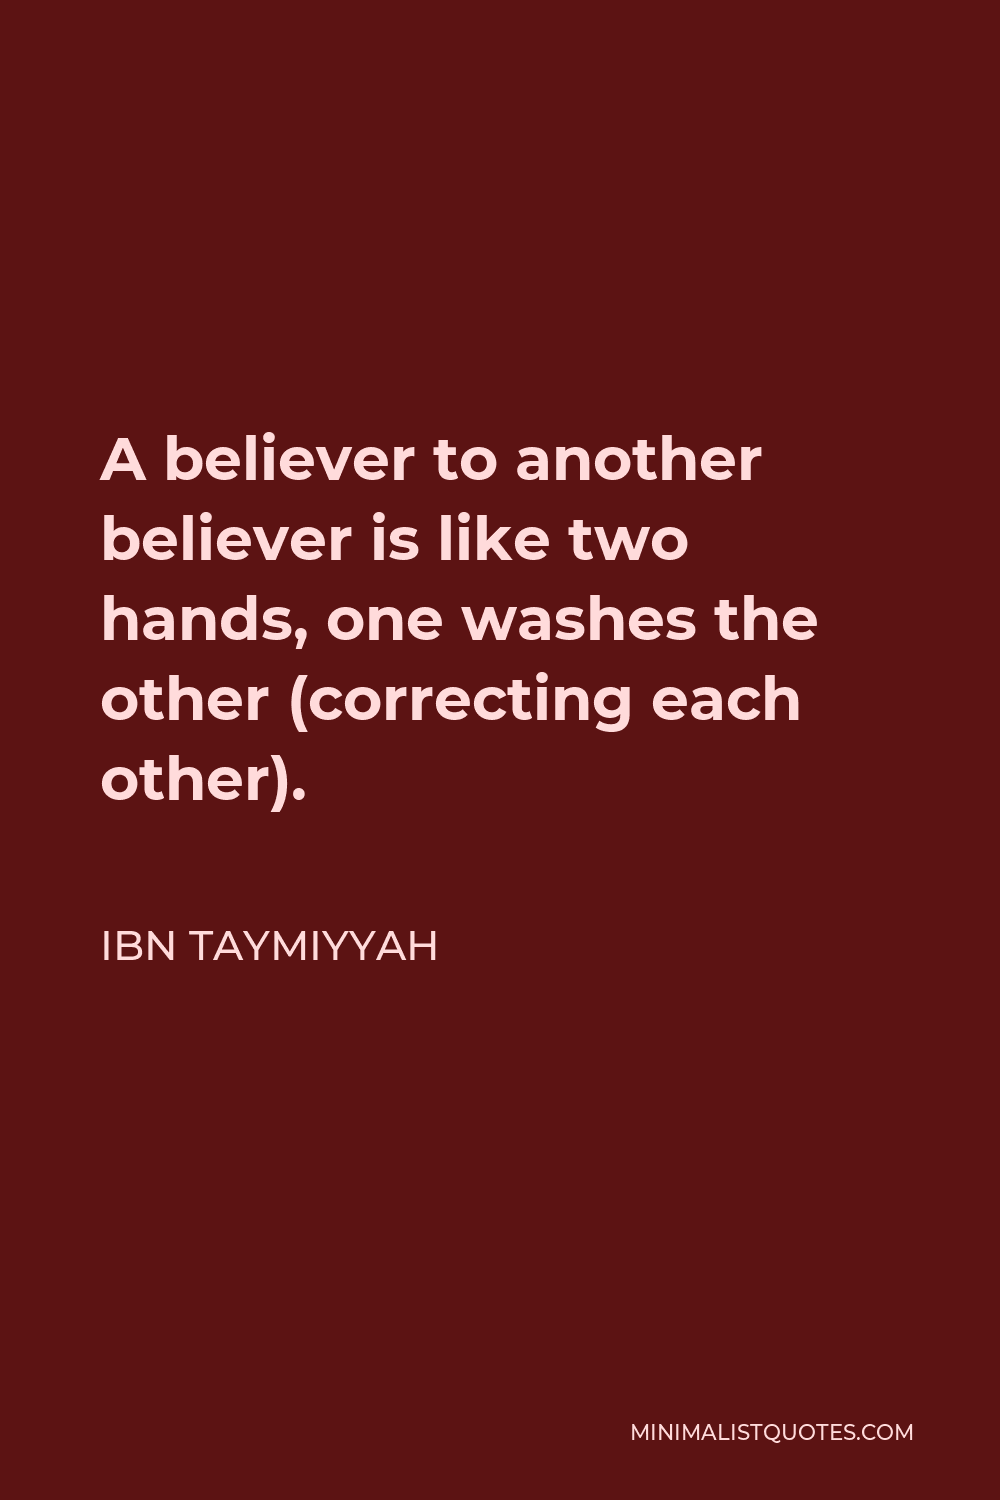 Ibn Taymiyyah Quote - A believer to another believer is like two hands, one washes the other (correcting each other).